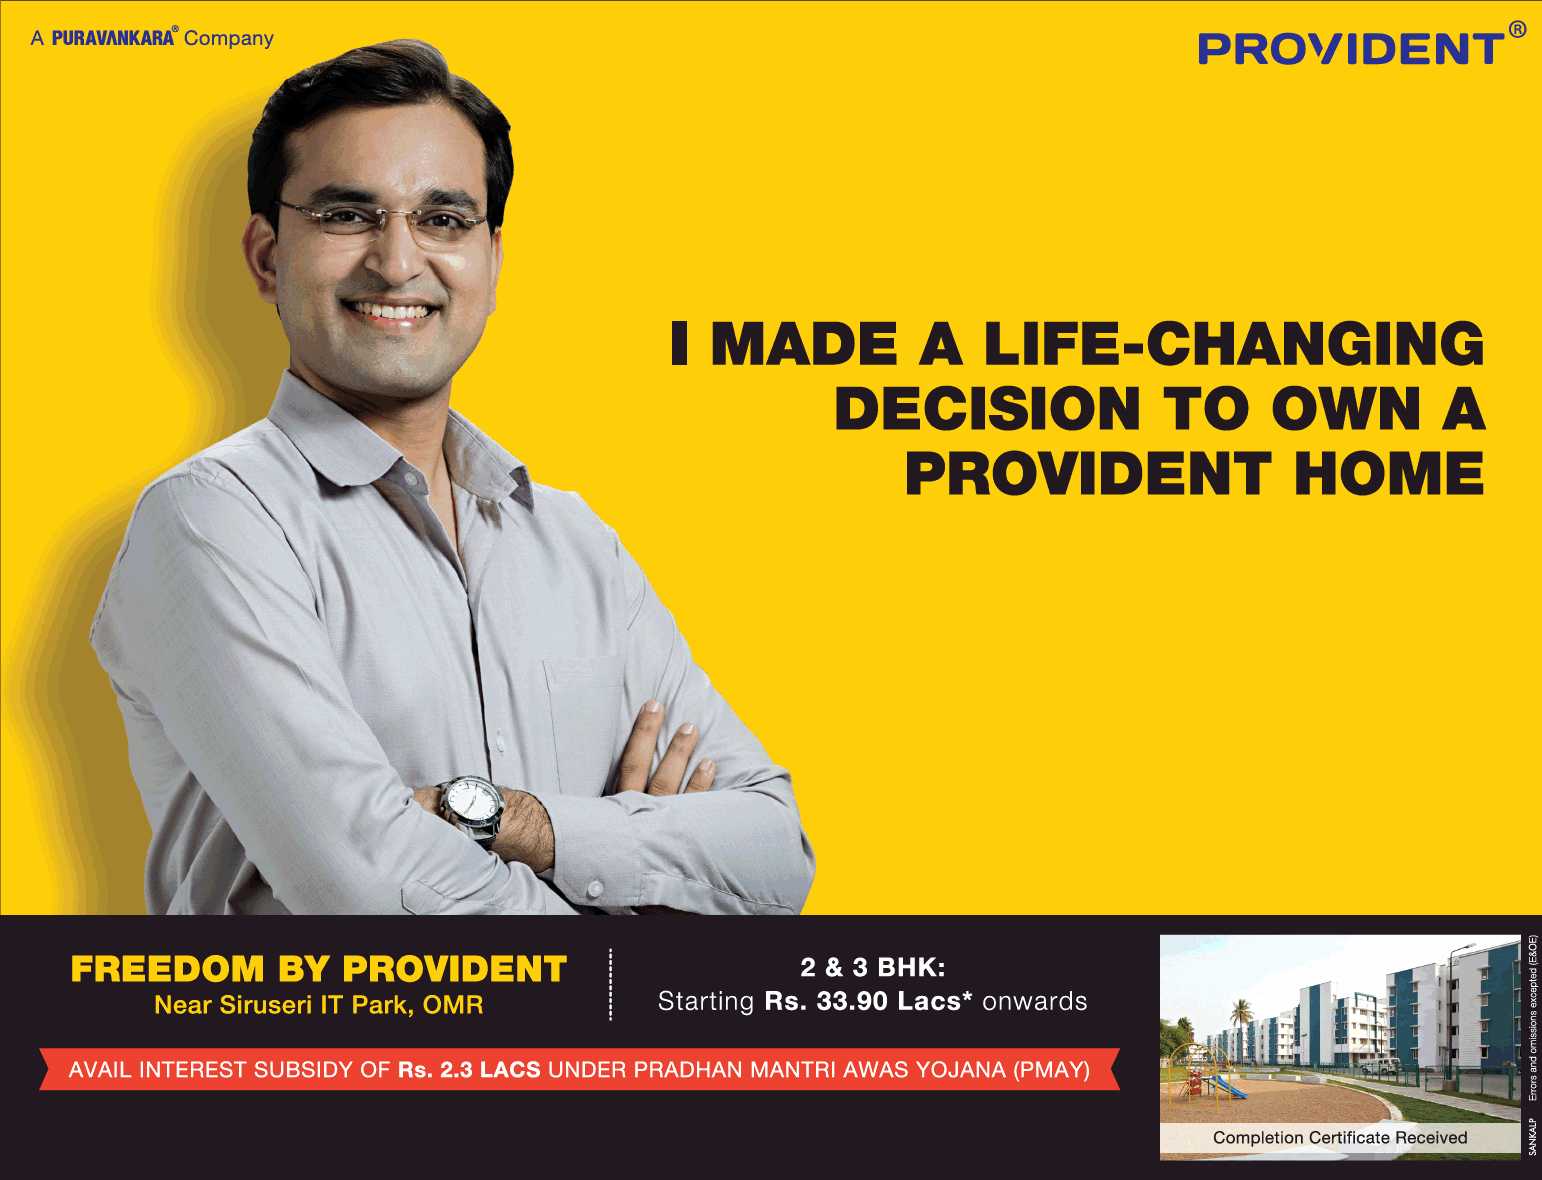 Avail interest subsidy of Rs. 2.3 Lacs under PMAY at Freedom by Provident in Chennai Update